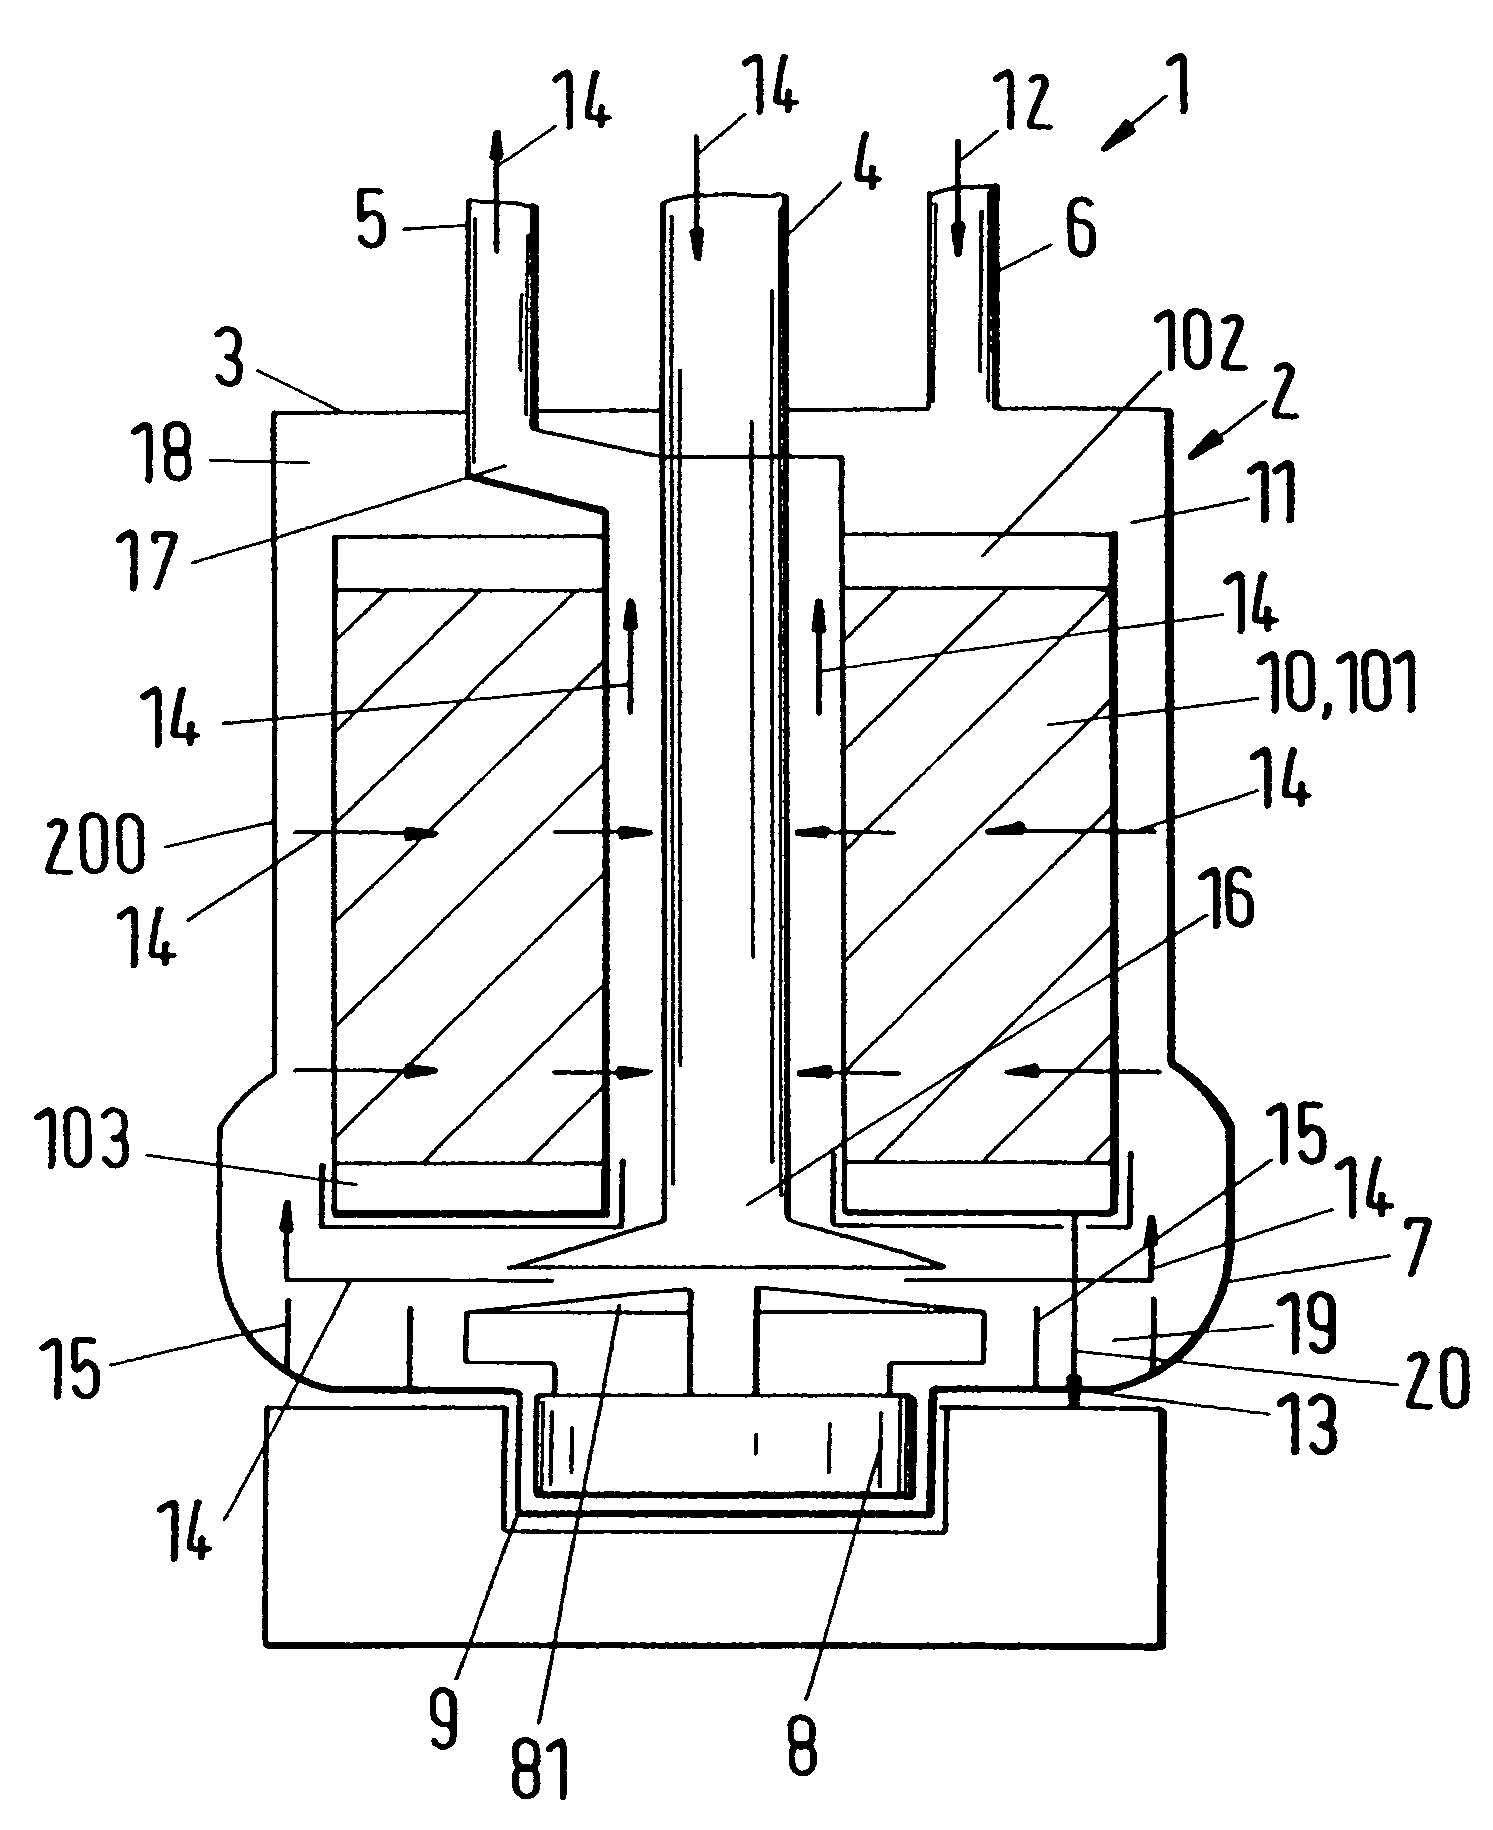 Integrated centrifugal blood pump-oxygenator, an extracorporeal life support system and a method of de-bubbling and priming an extracorporeal life support system